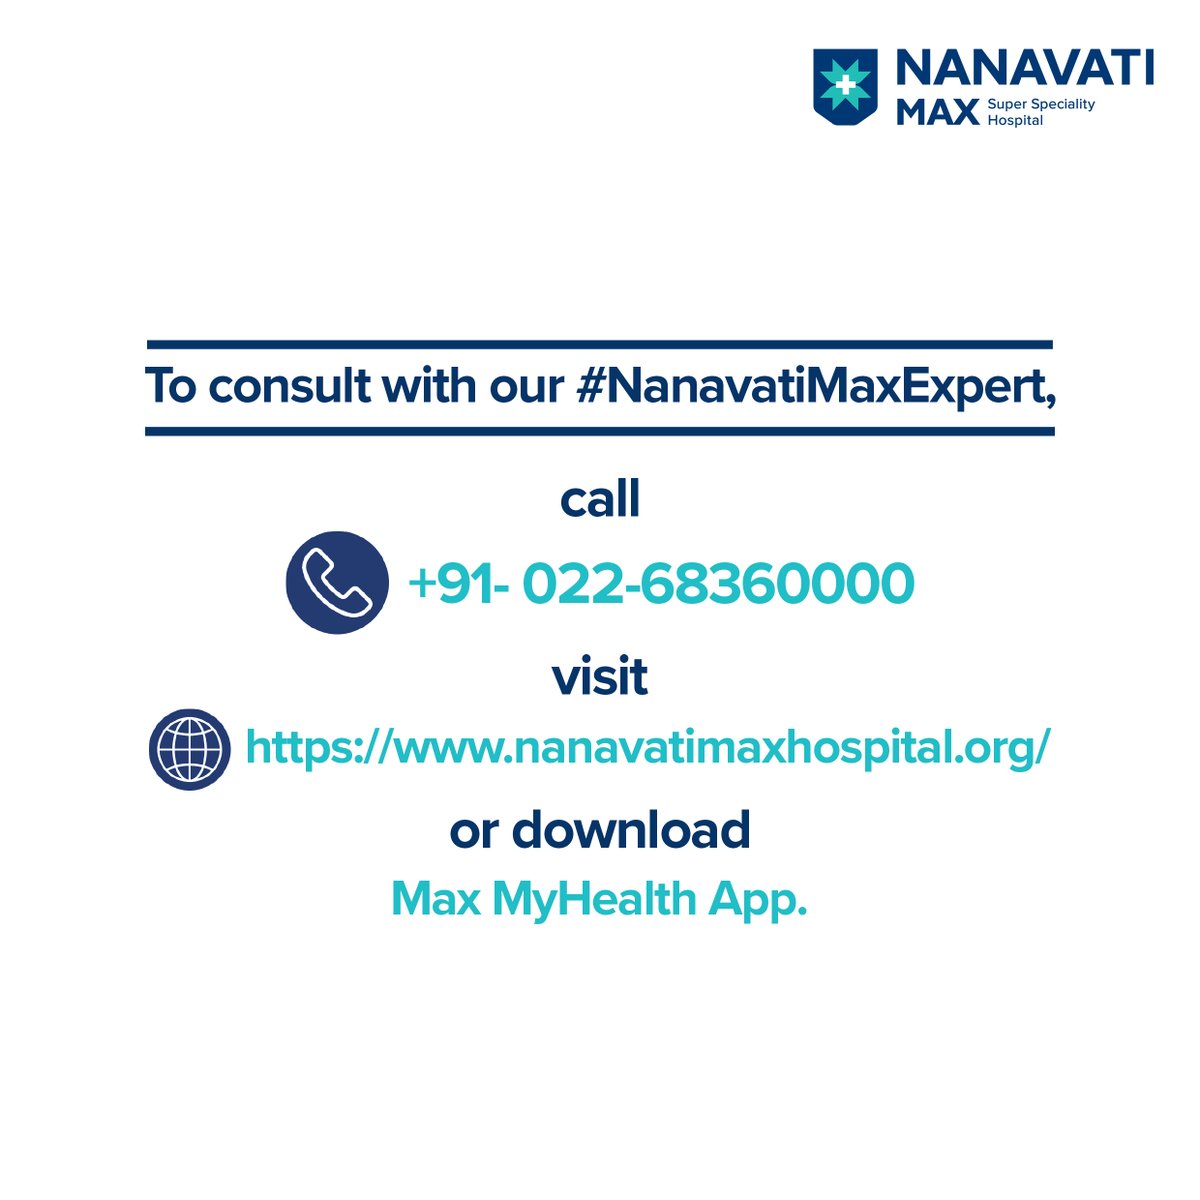 Welcome Dr. Kant Shah, Senior Consultant - Centre for Complex Paediatric Surgery, Nanavati Max Hospital. With over 18+ years of experience in the field, he specialises in Robotic & Advanced Laparoscopic Surgery, Neonatal Surgery & Hepatobiliary Surgery.